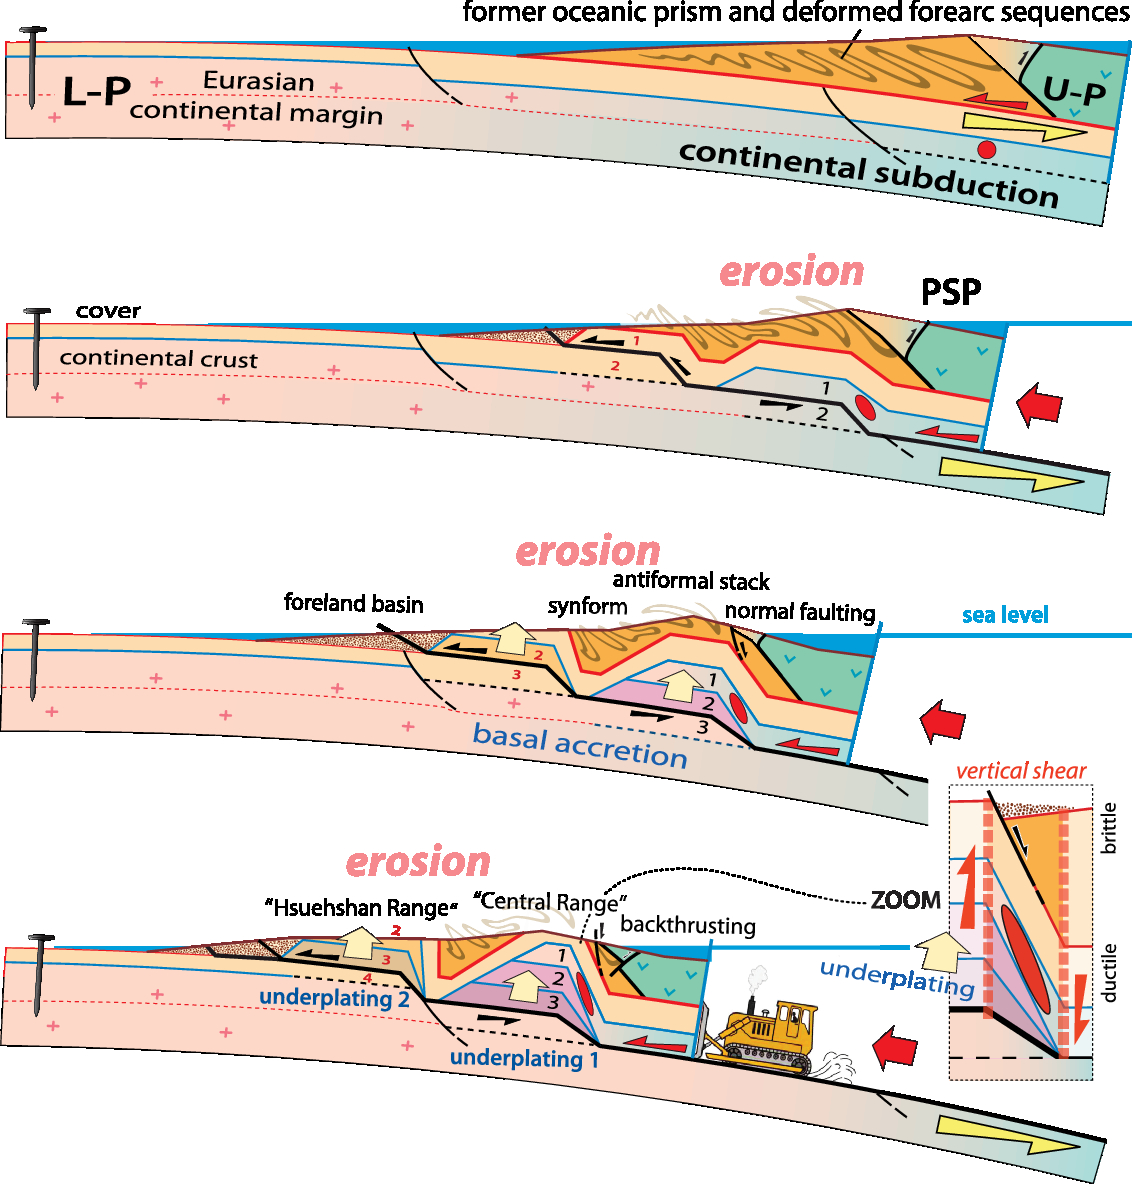 Extensional magmatism caused by strain partitioning: insights from